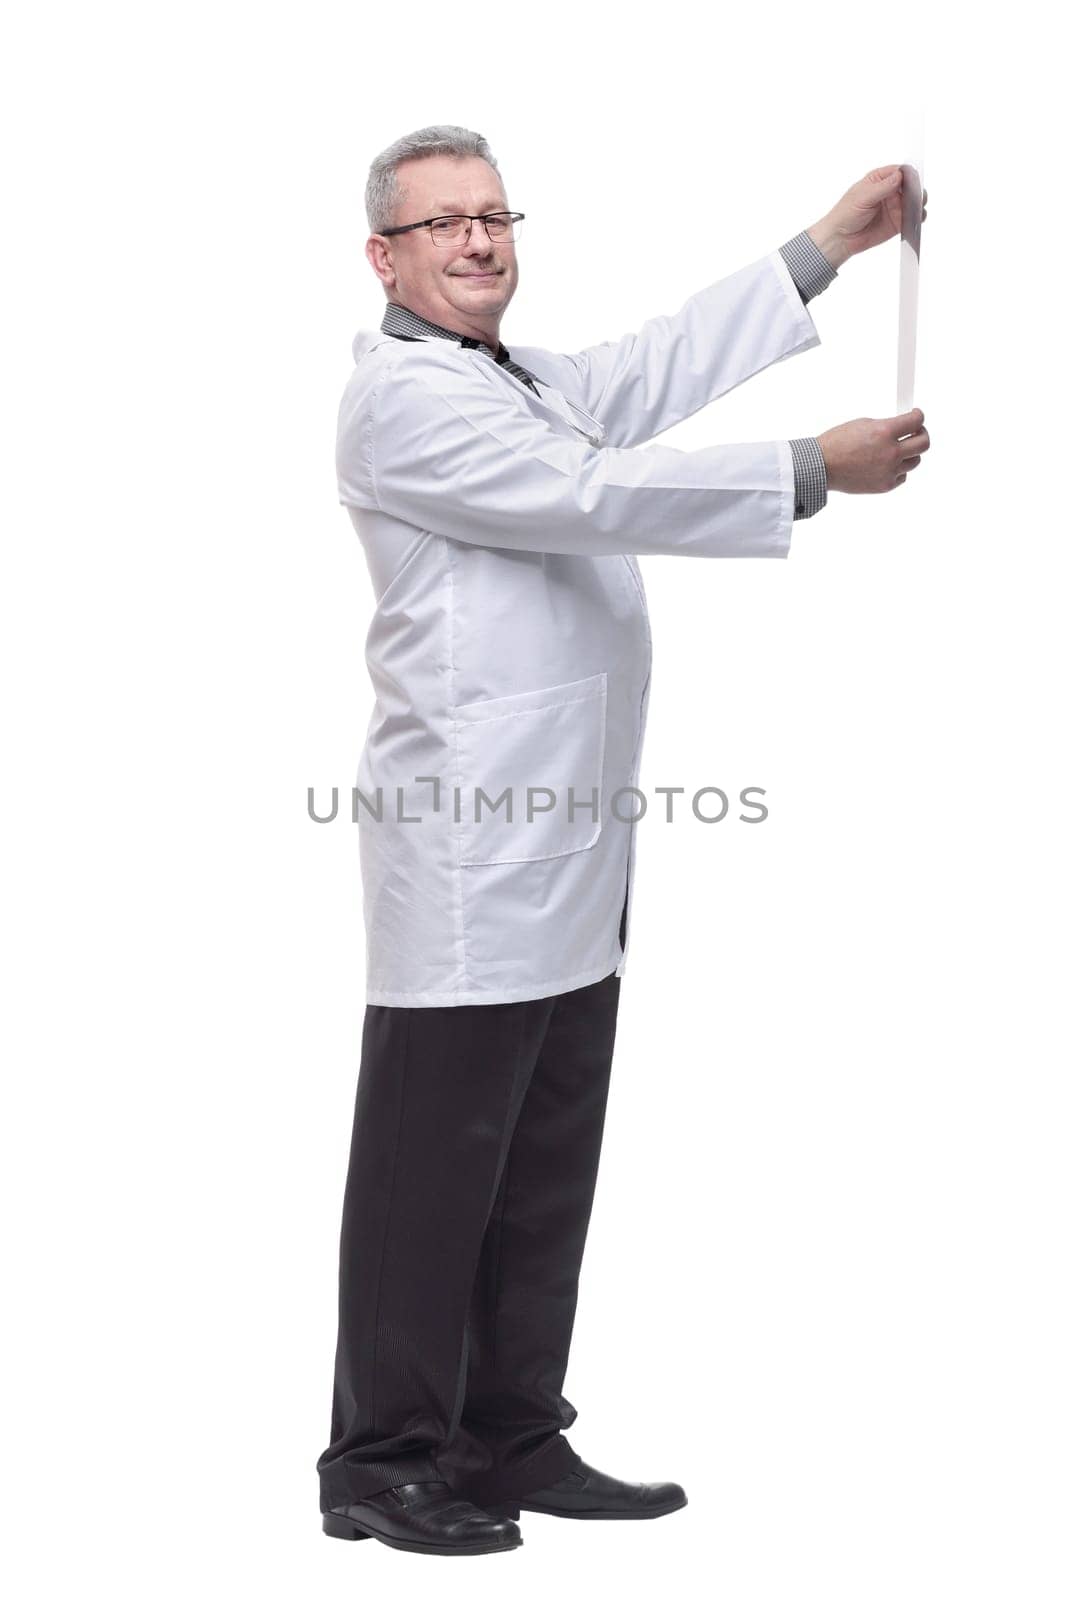 Doctor having a close look at x-ray image while holding it against light by asdf